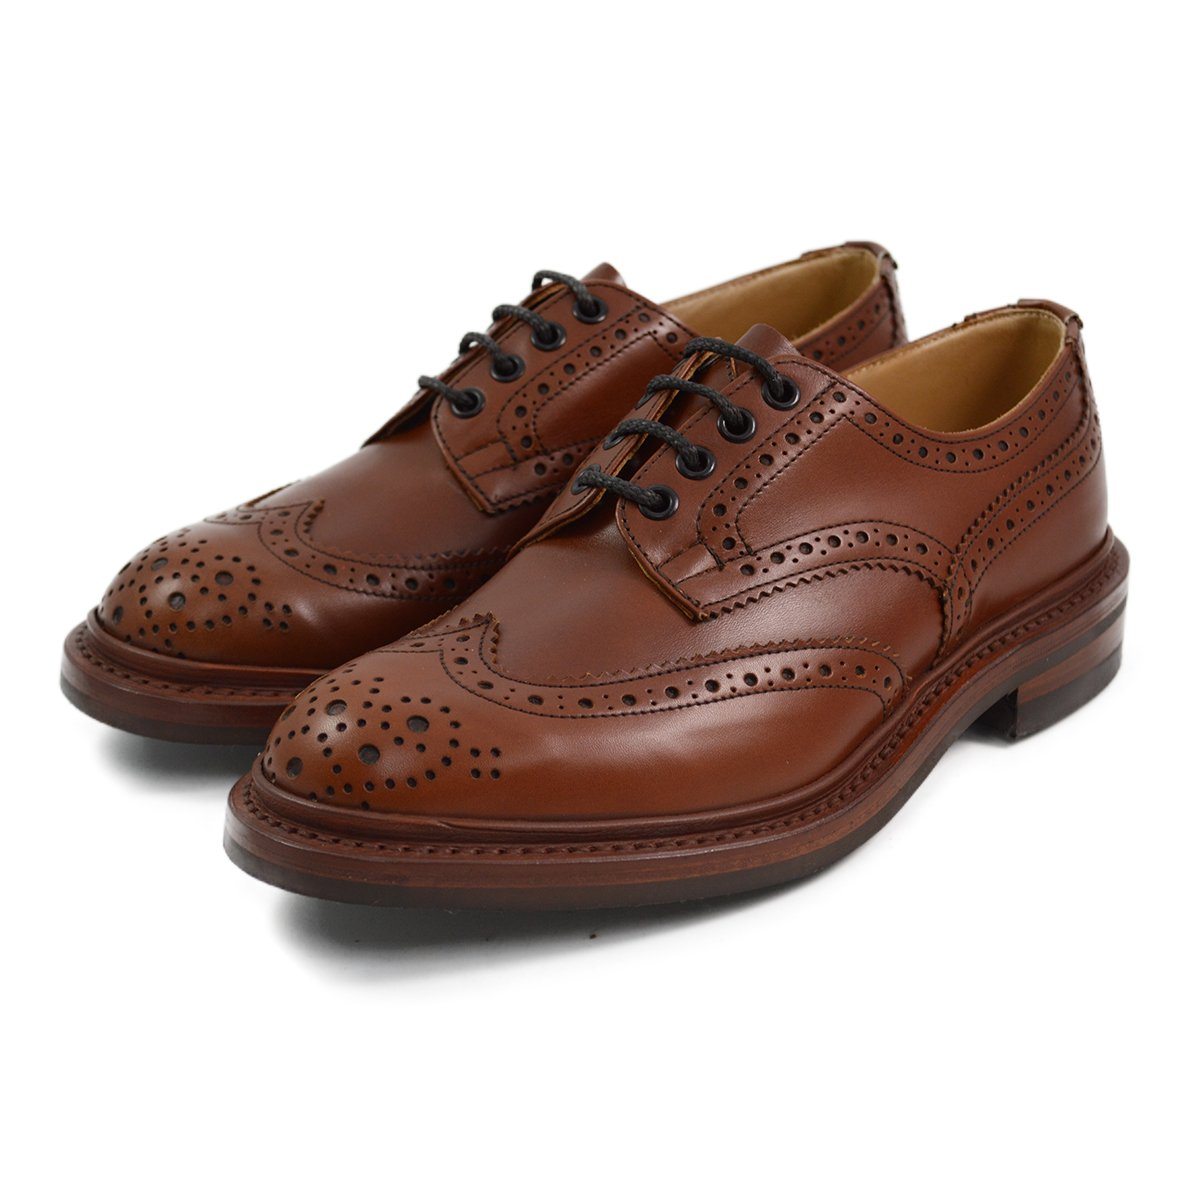 Trickers Bourton Country Shoe Dark Brown | The Sporting Lodge